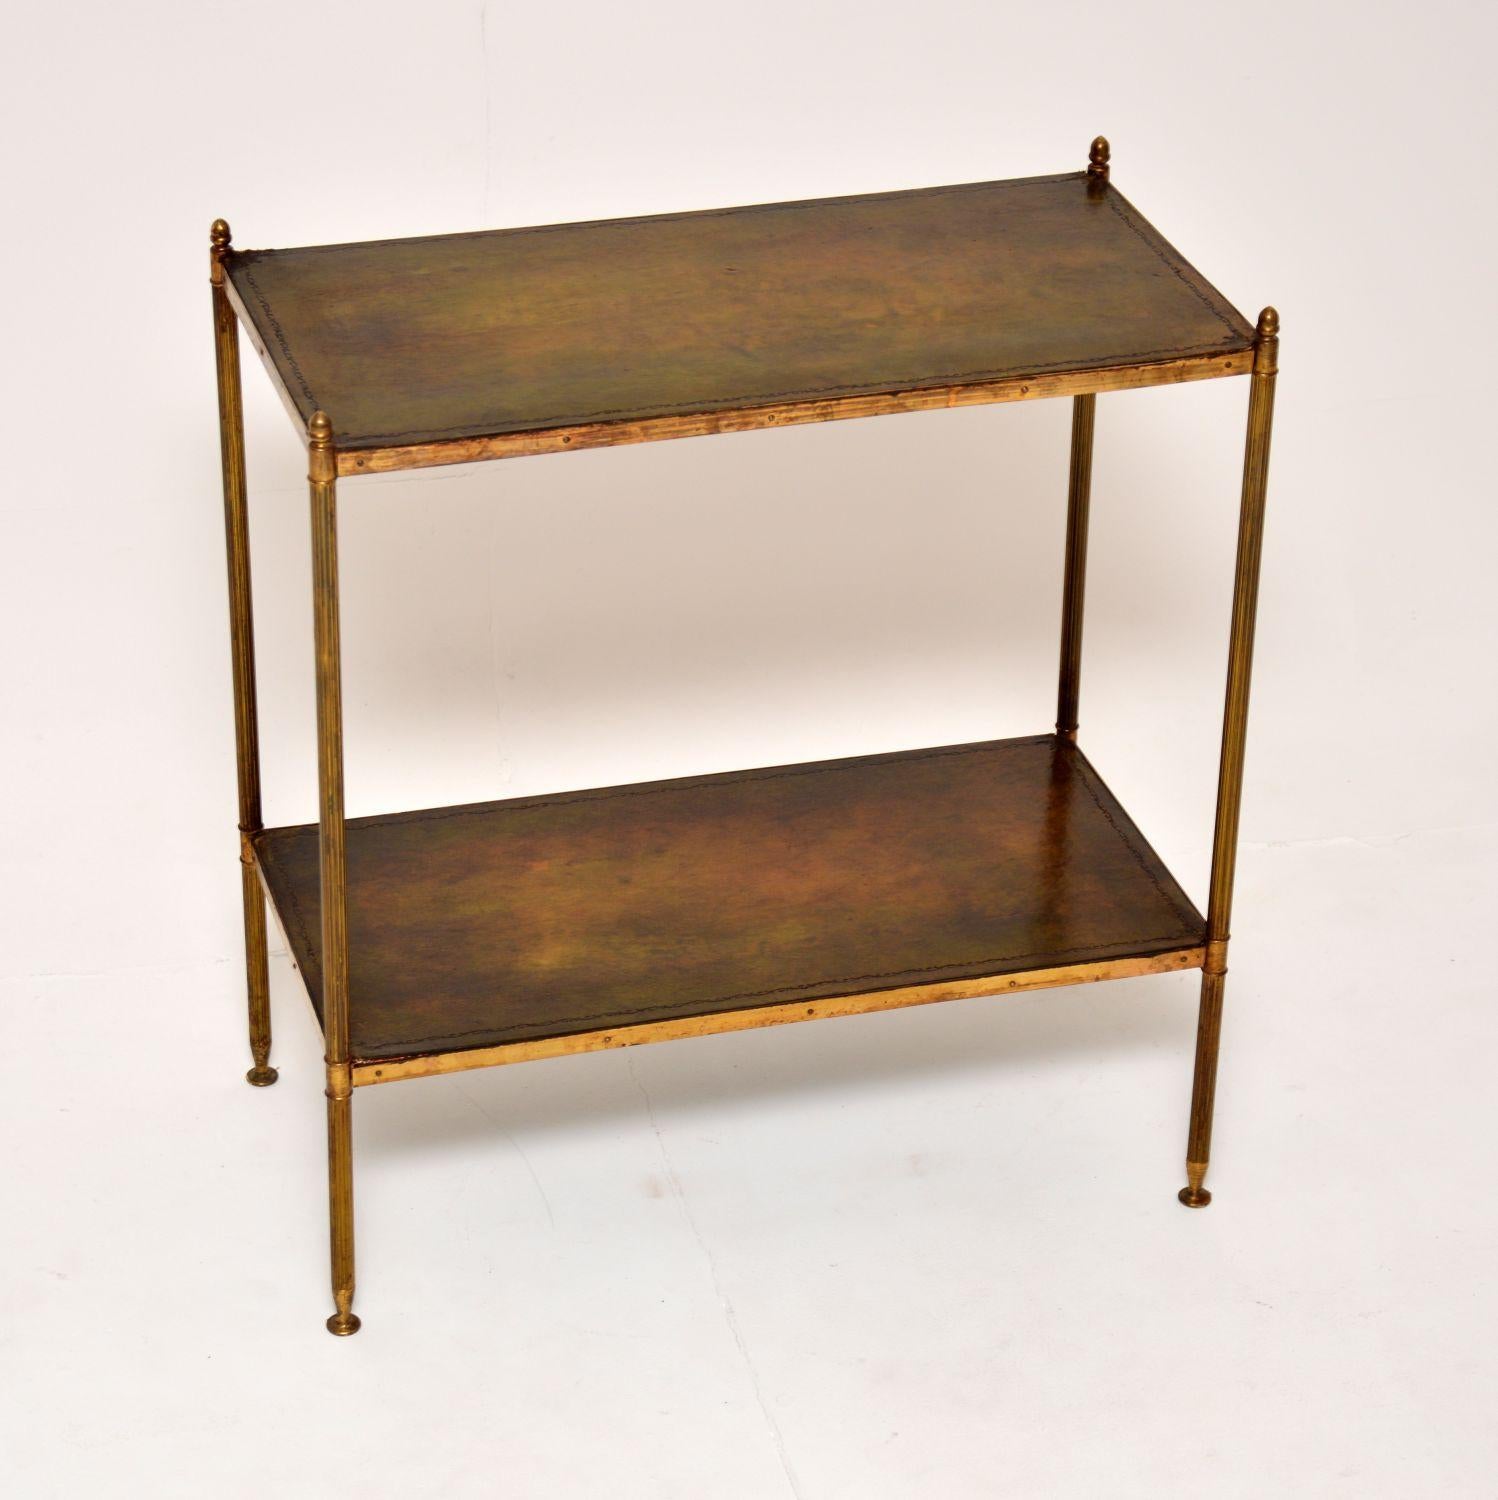 A smart and useful antique solid brass and leather two tier side table. This was made in France, it dates from around the 1930’s.

This is very well made, with finely fluted legs and acorn finials. It is finished identically front and back, so can